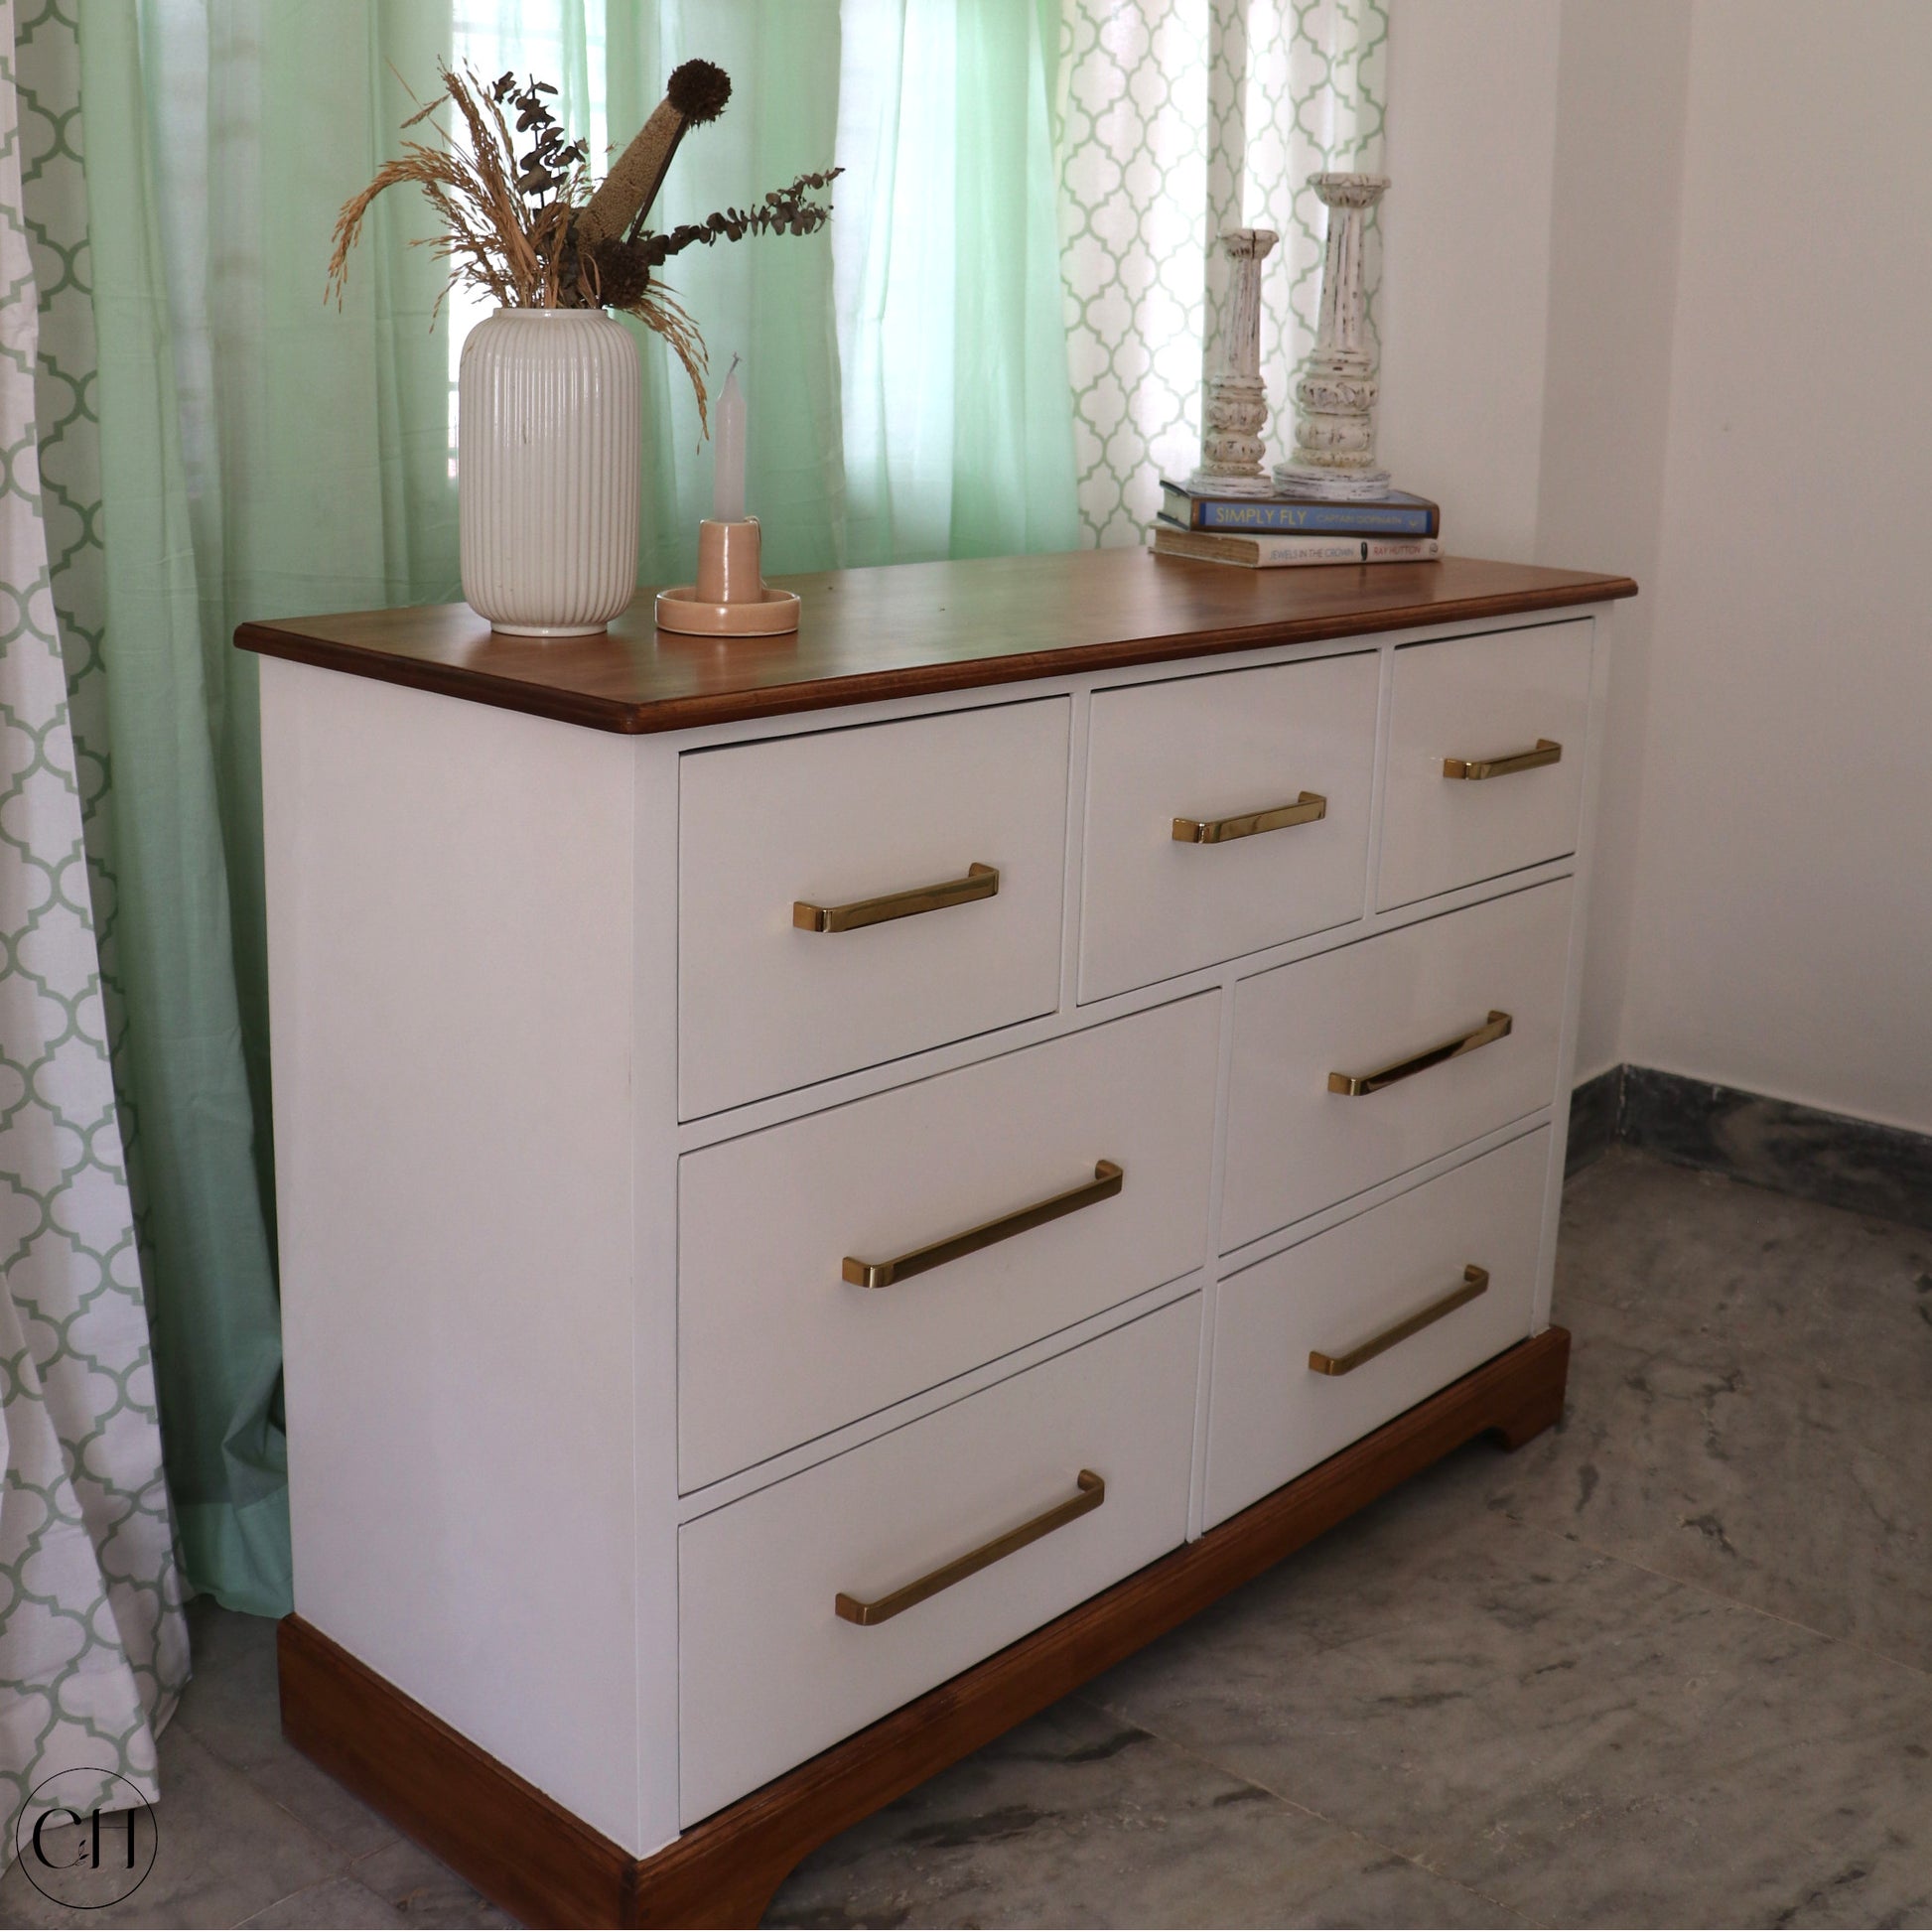 CustHum-Wisteria - rustic-modern chest of drawers in two-tone white-and-wood finish, brass-coated handles (ISO)